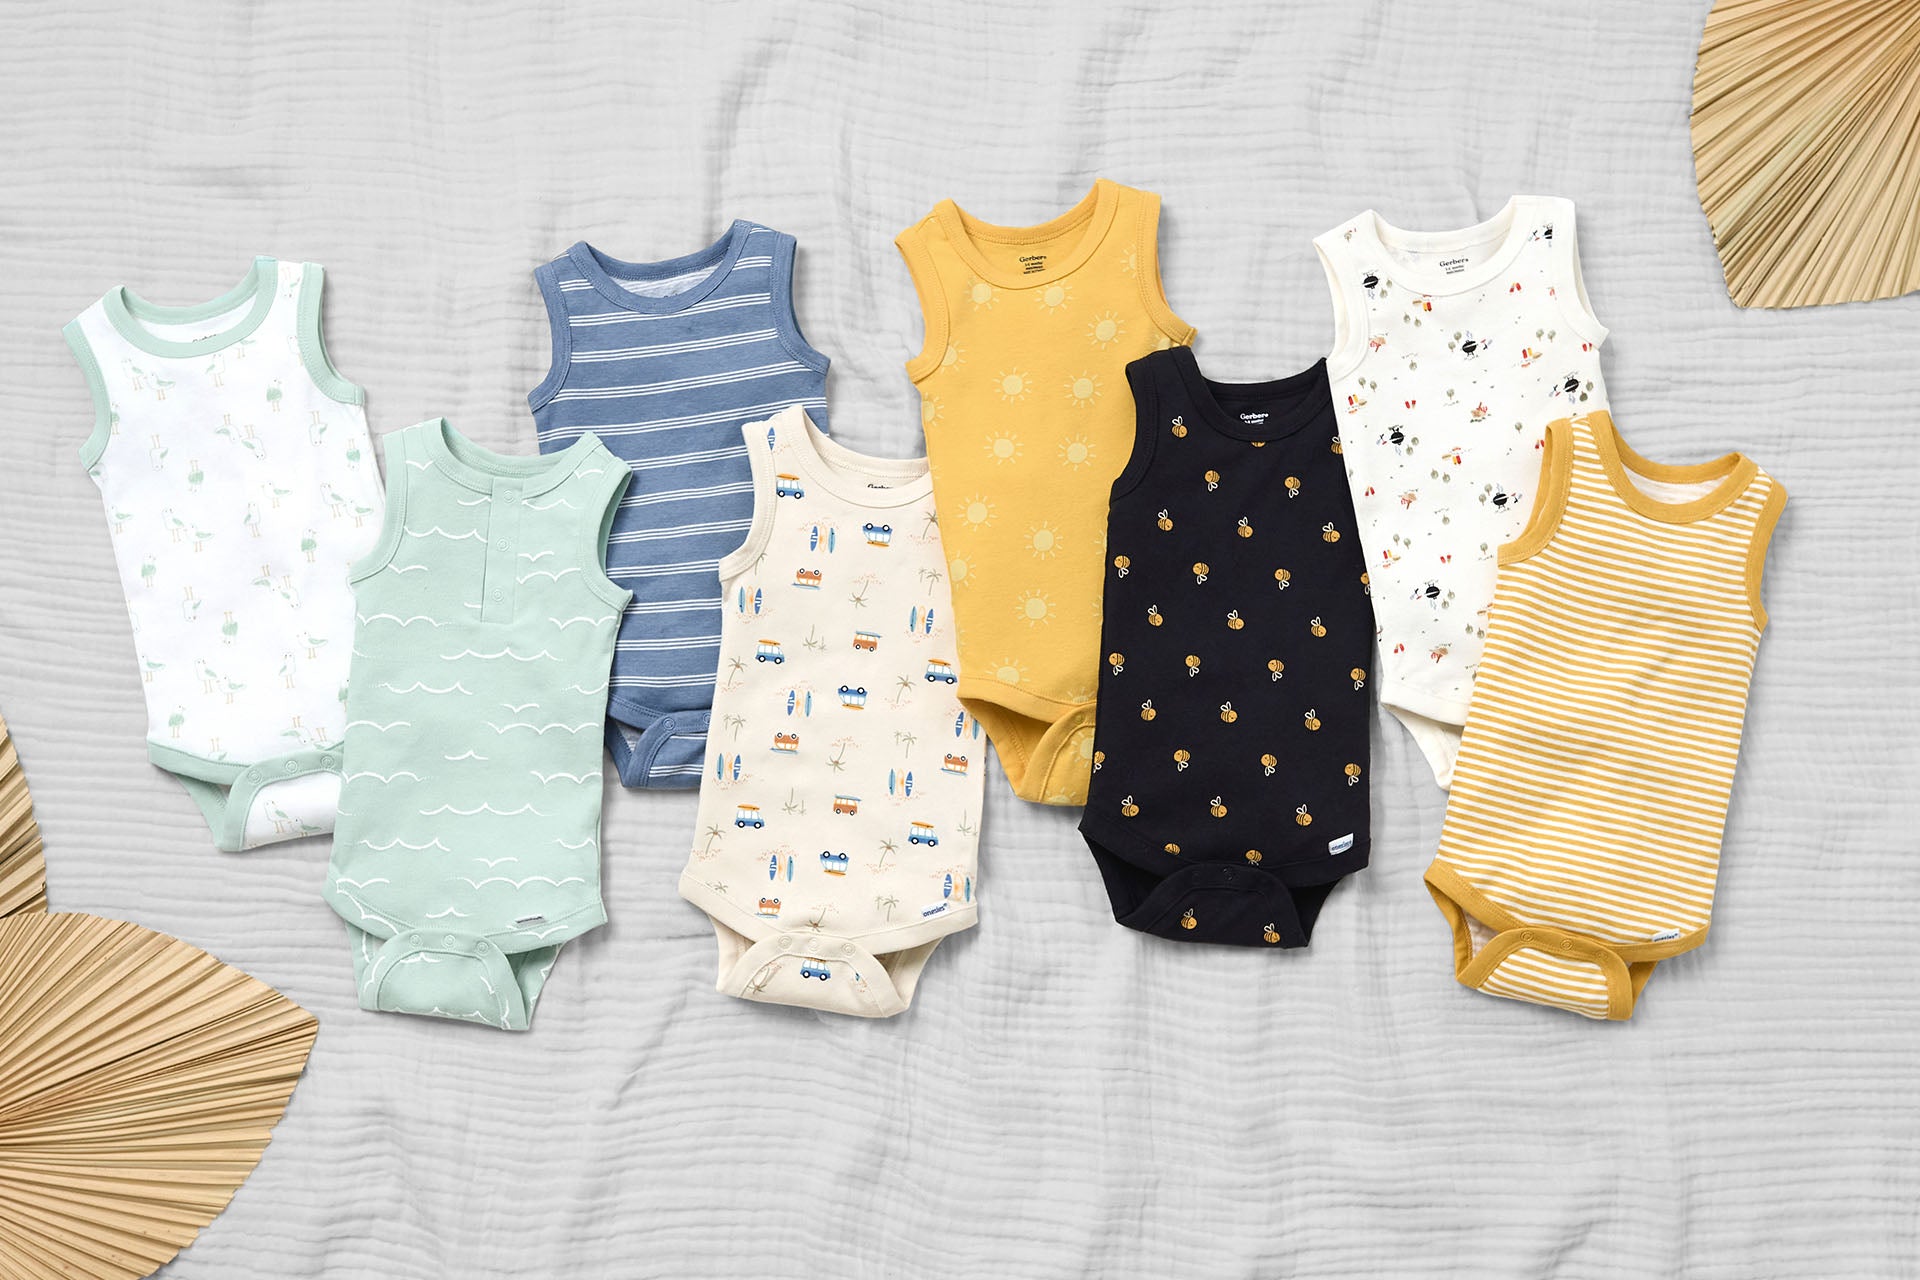 A display of eight sleeveless baby onesies in various colors and patterns arranged on a light-colored fabric background surrounded by decorative leaves.